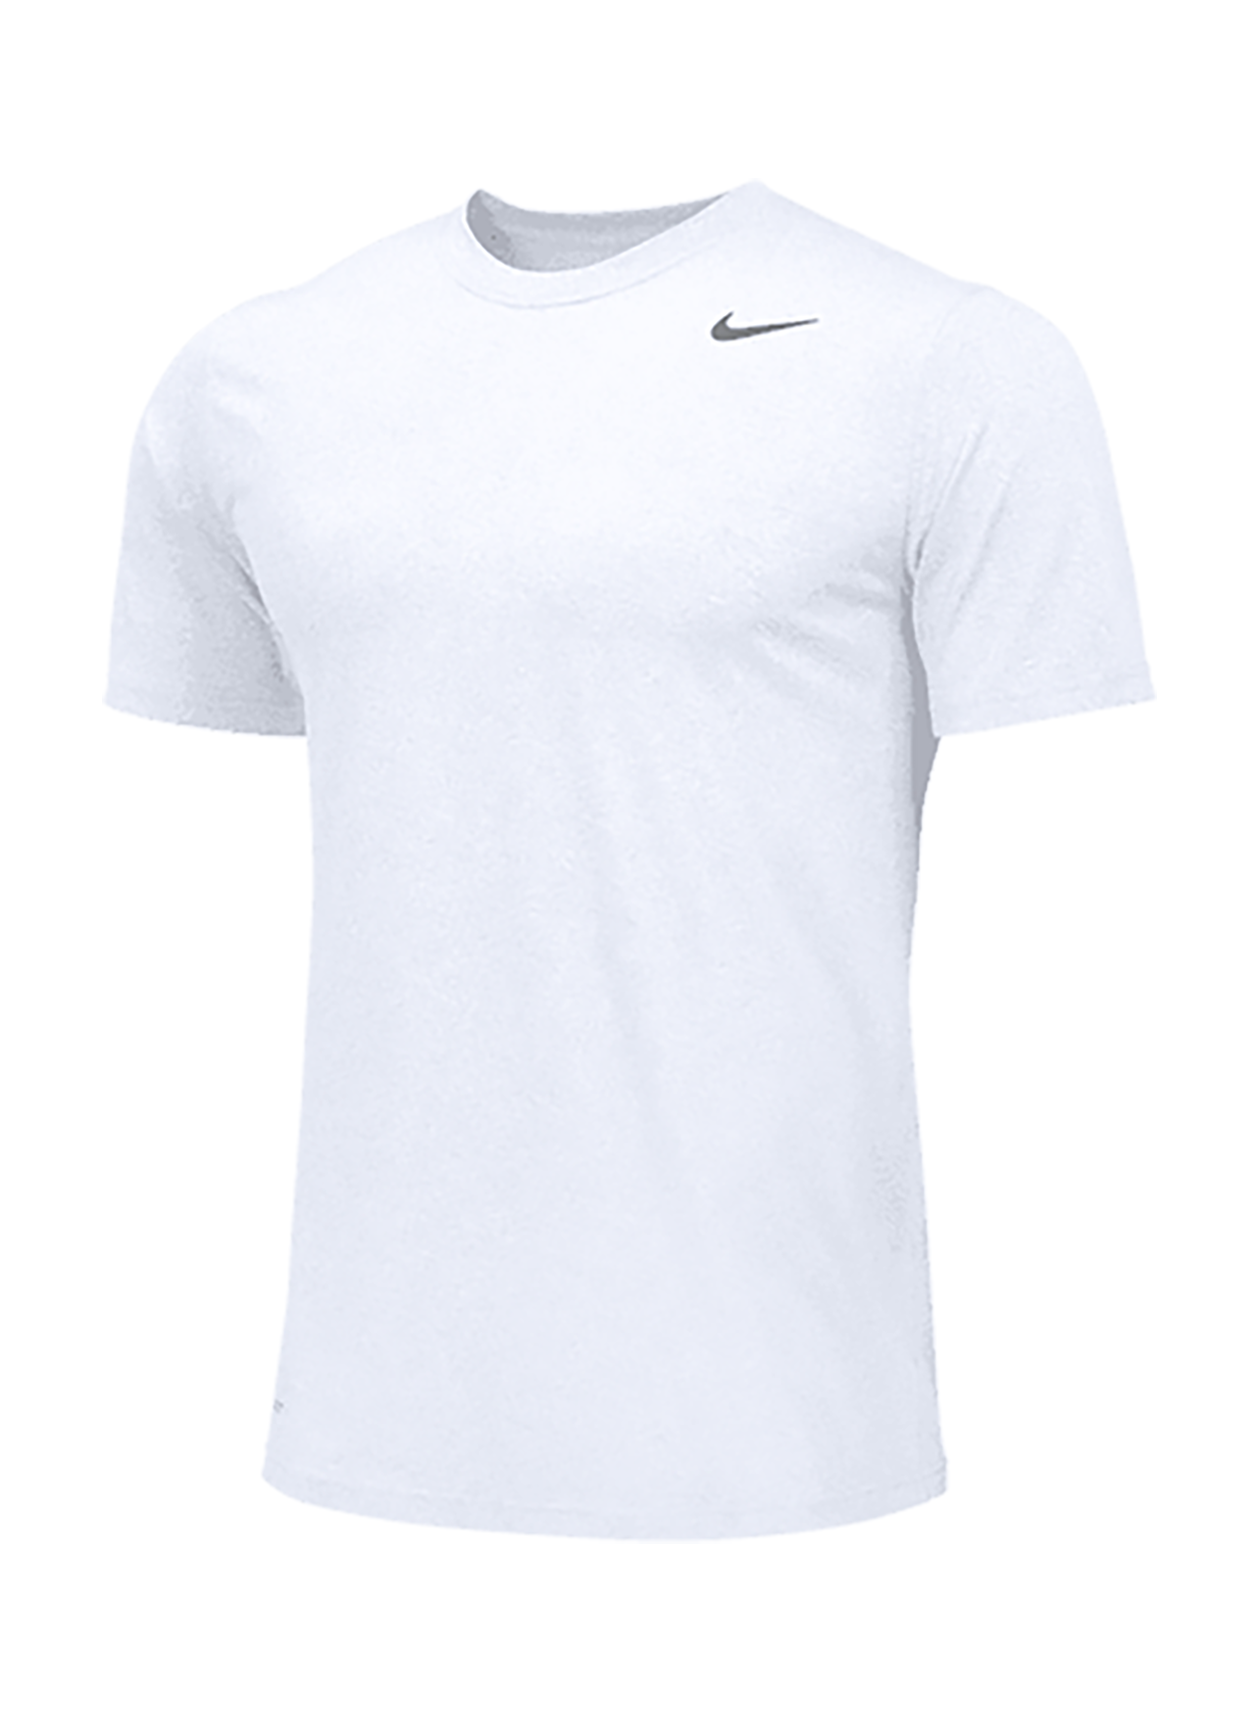 Buy White Tshirts for Men by NIKE Online